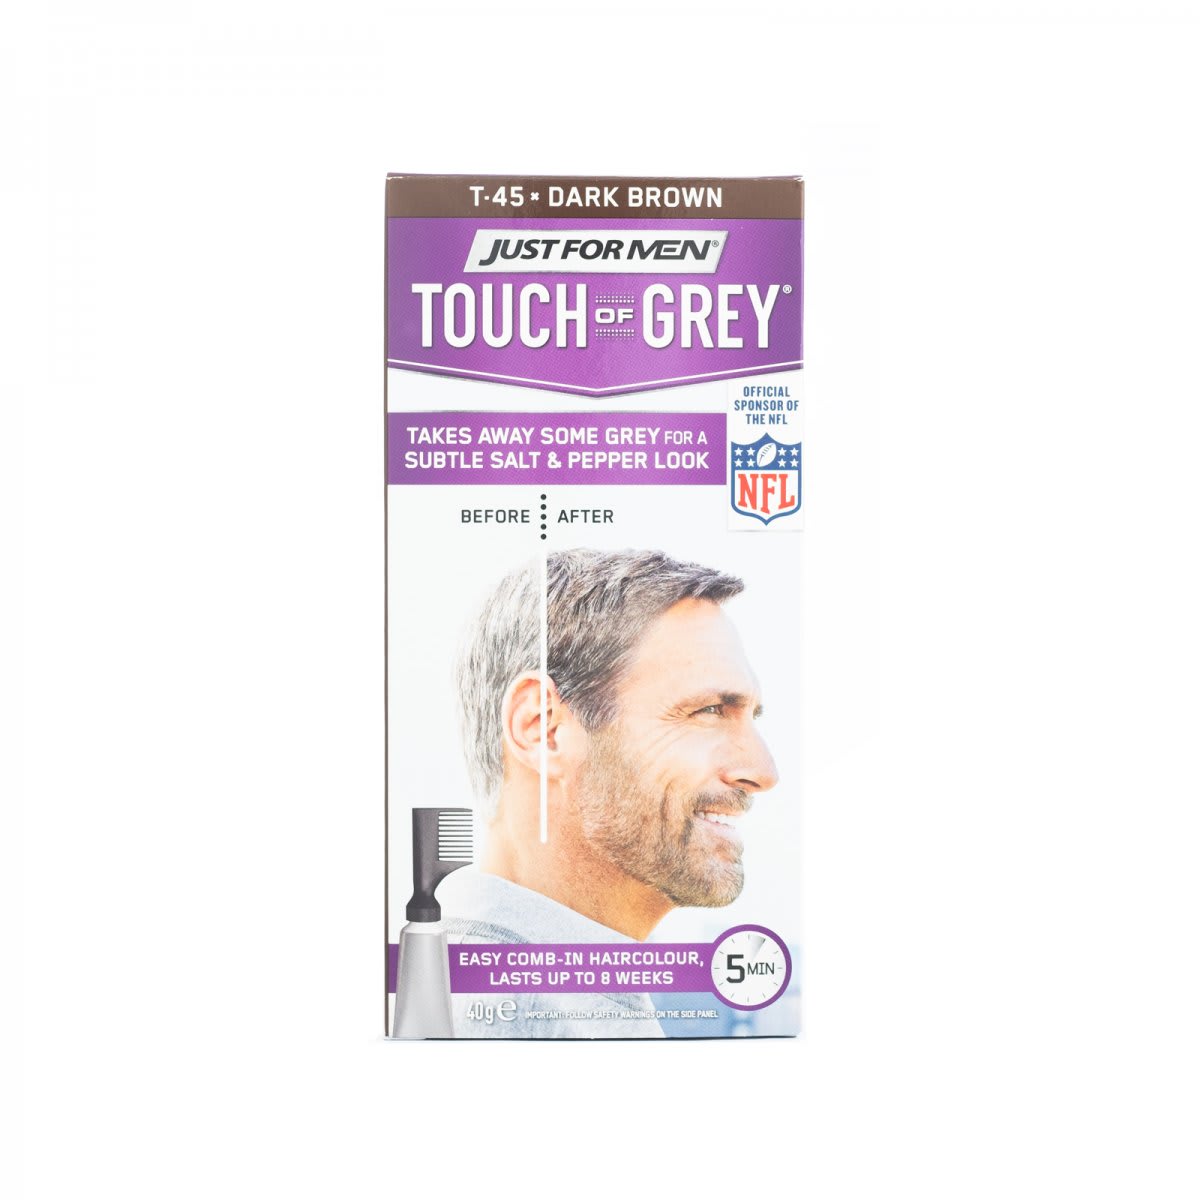 Just For Men - Touch of Grey - Dark Brown Grey